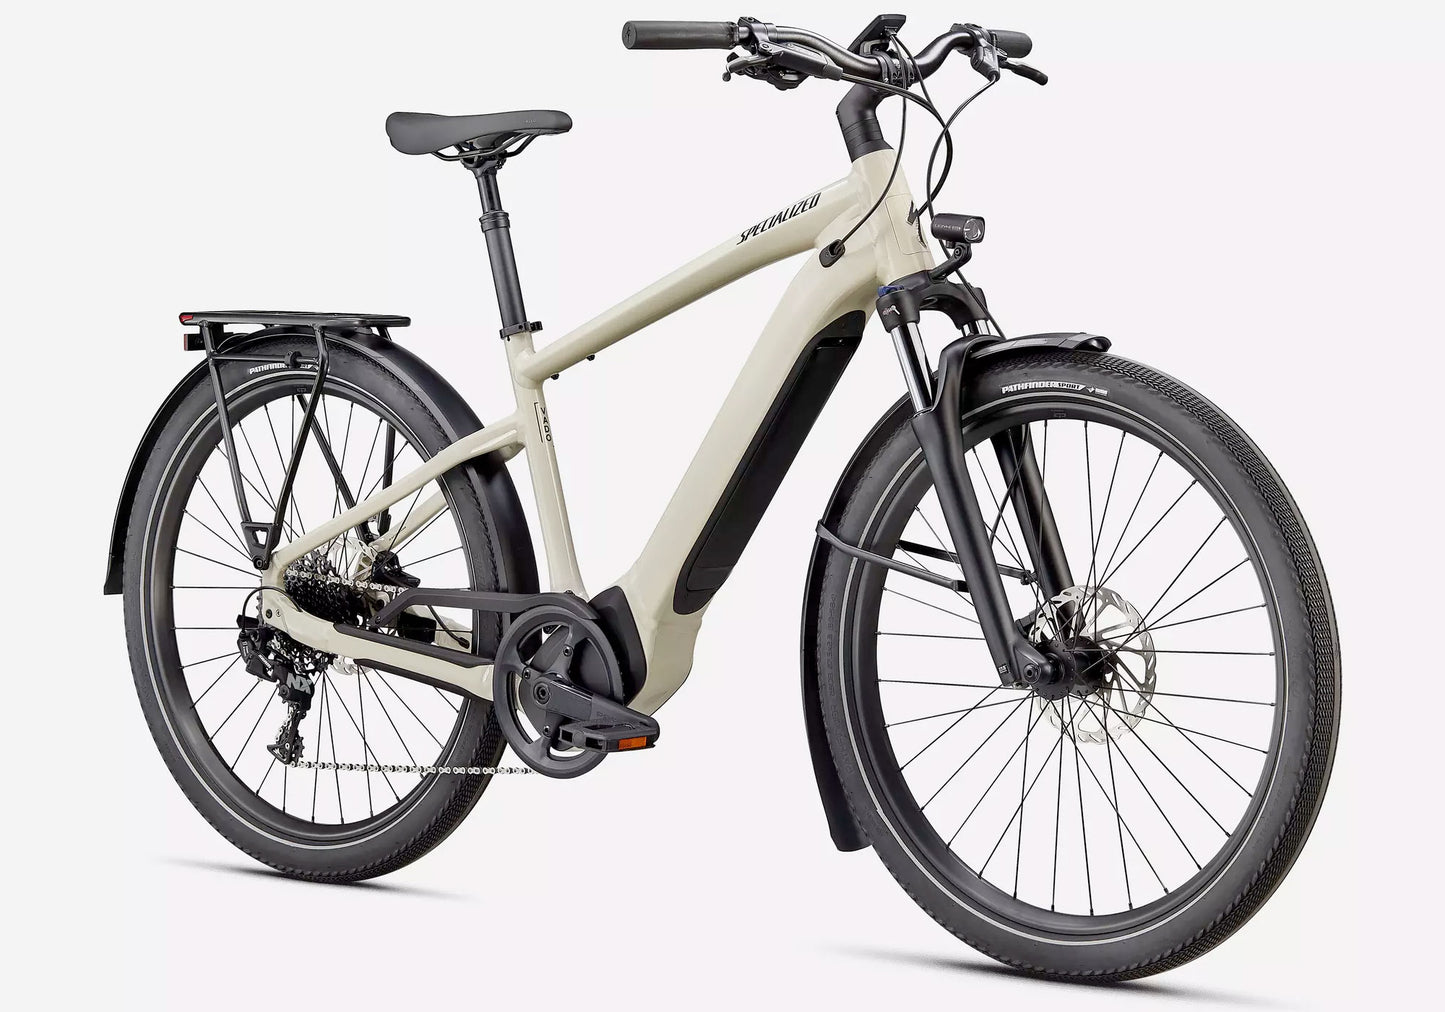 2022 Specialized Turbo Vado 4.0 Electric Bike - White Mountains, buy online Woolys Wheels Sydney